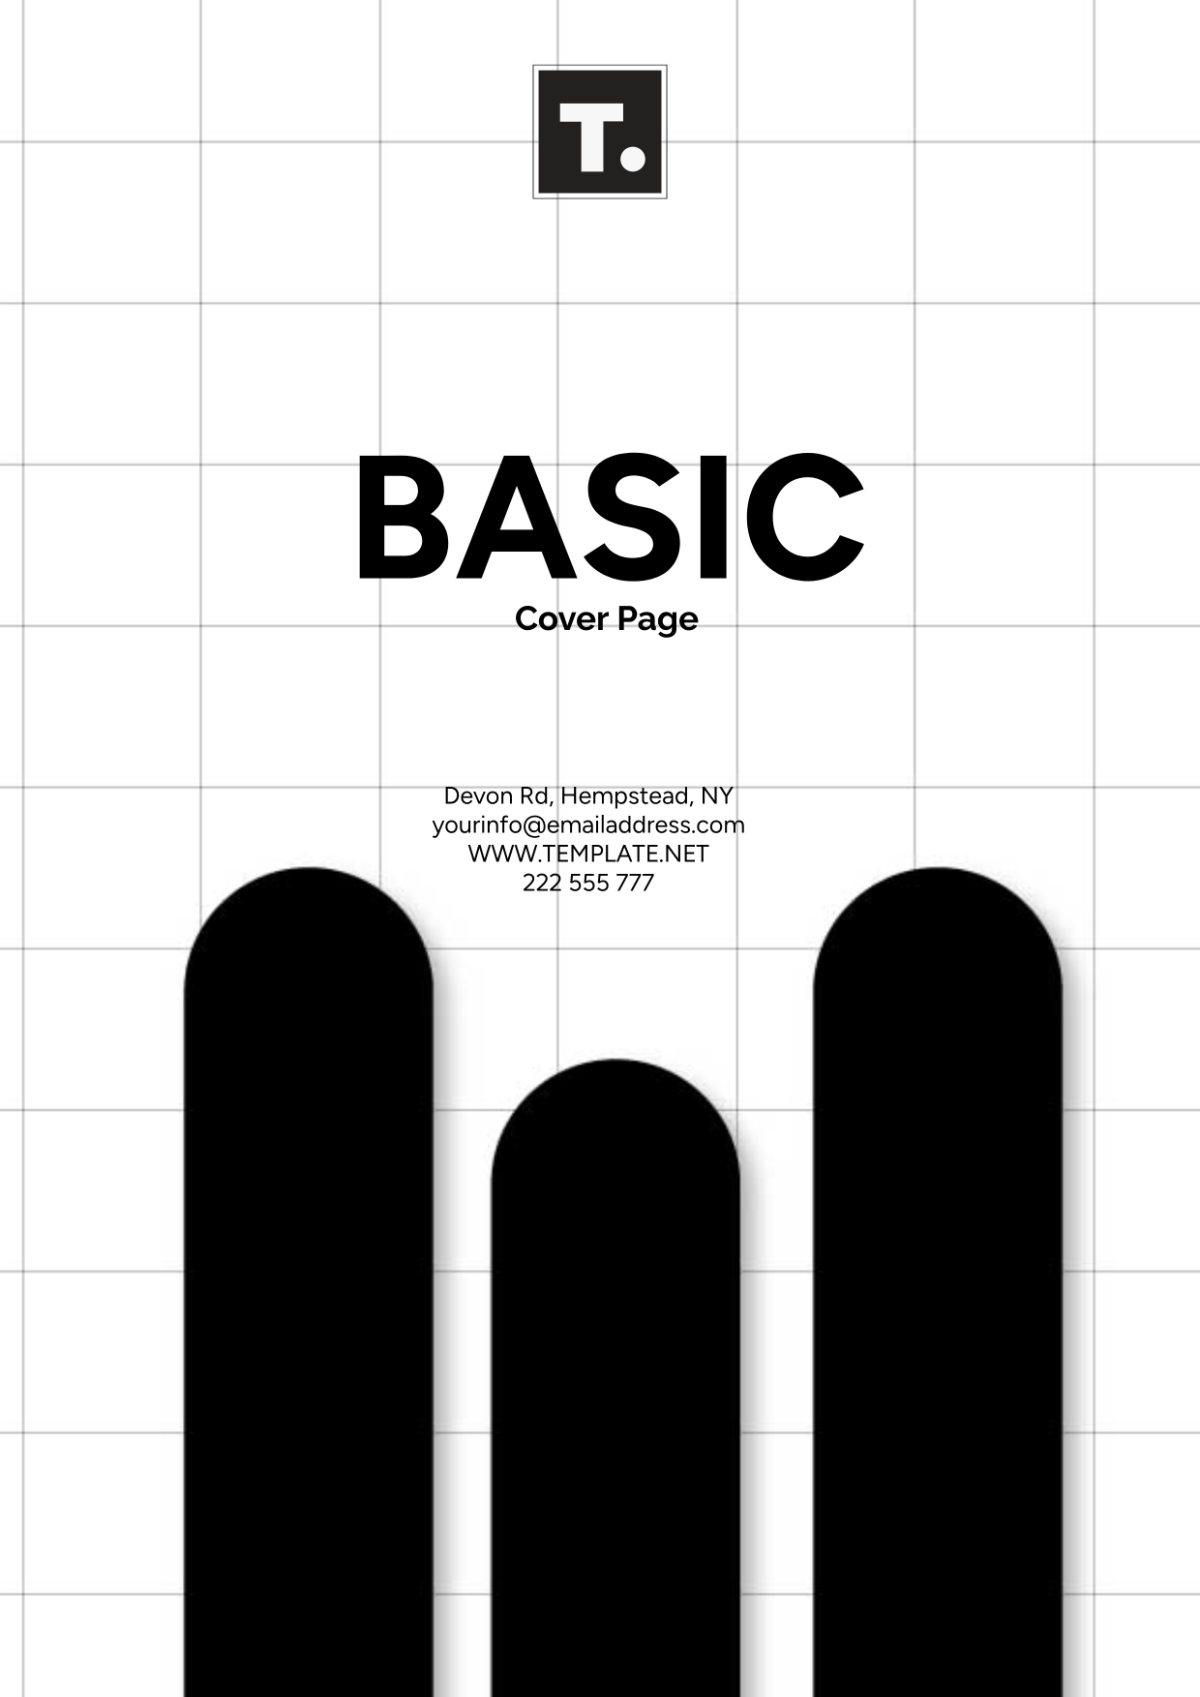 Basic Cover Page